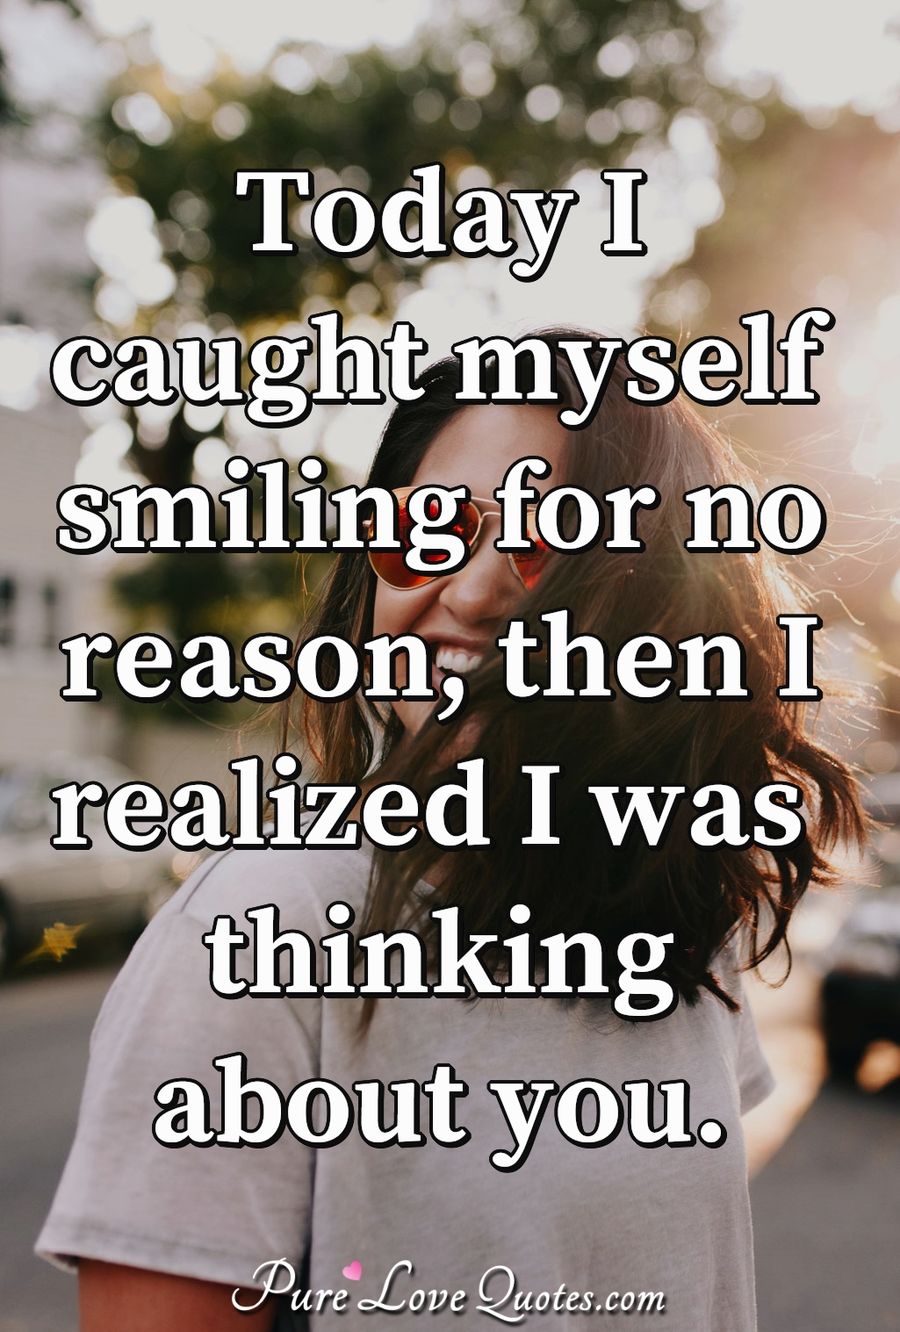 Today I caught myself smiling for no reason, then I realized I was thinking about you. - Anonymous